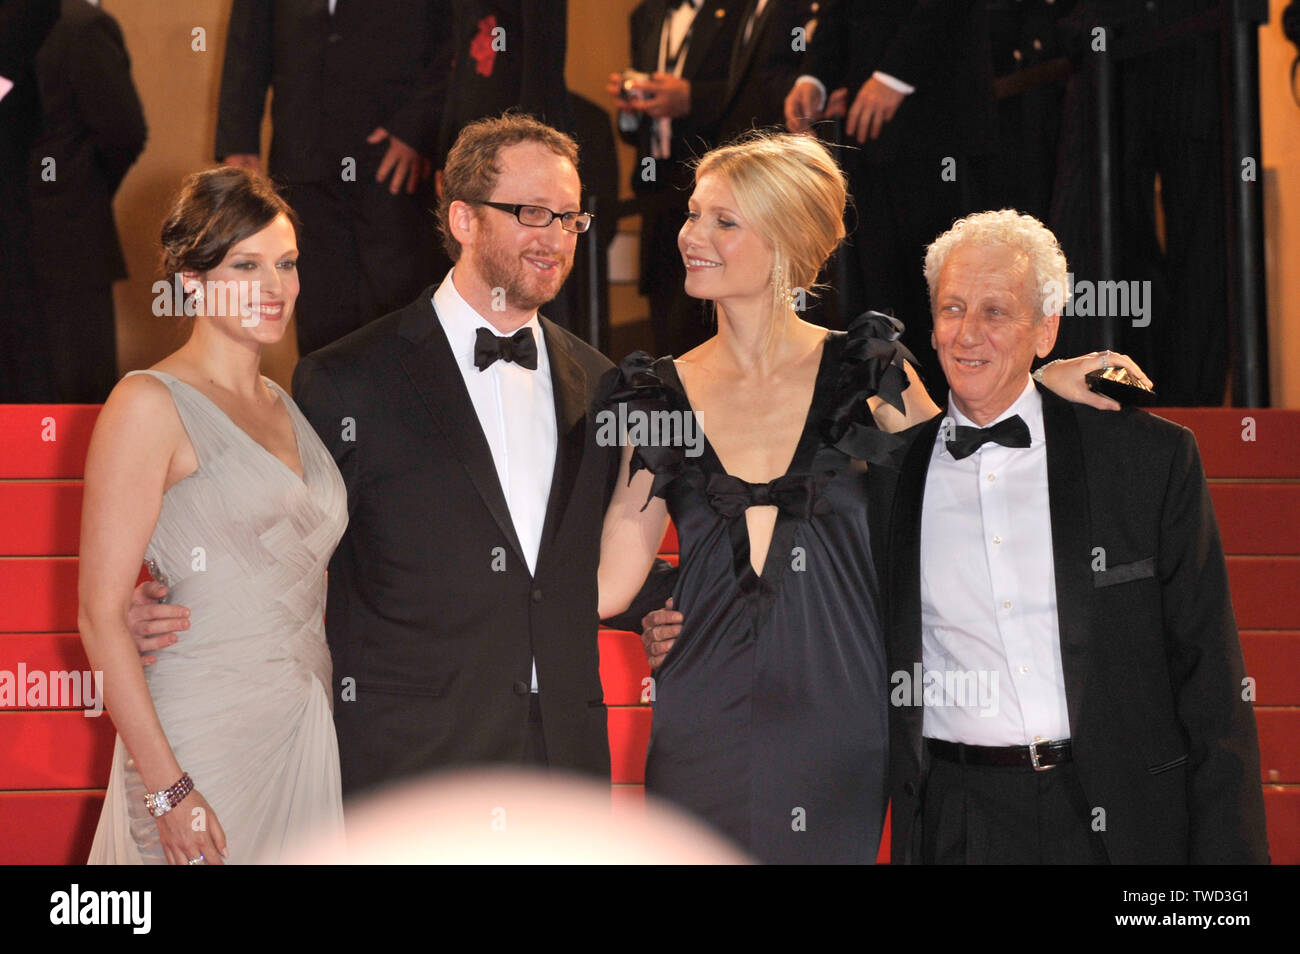 CANNES, FRANCE. May 19, 2008: LtoR: Vinessa Shaw, James Gray, Gwyneth Paltrow & Moshonov Moni at the premiere of their new movie 'Two Lovers' at the 61st Annual International Film Festival de Cannes. © 2008 Paul Smith / Featureflash Stock Photo